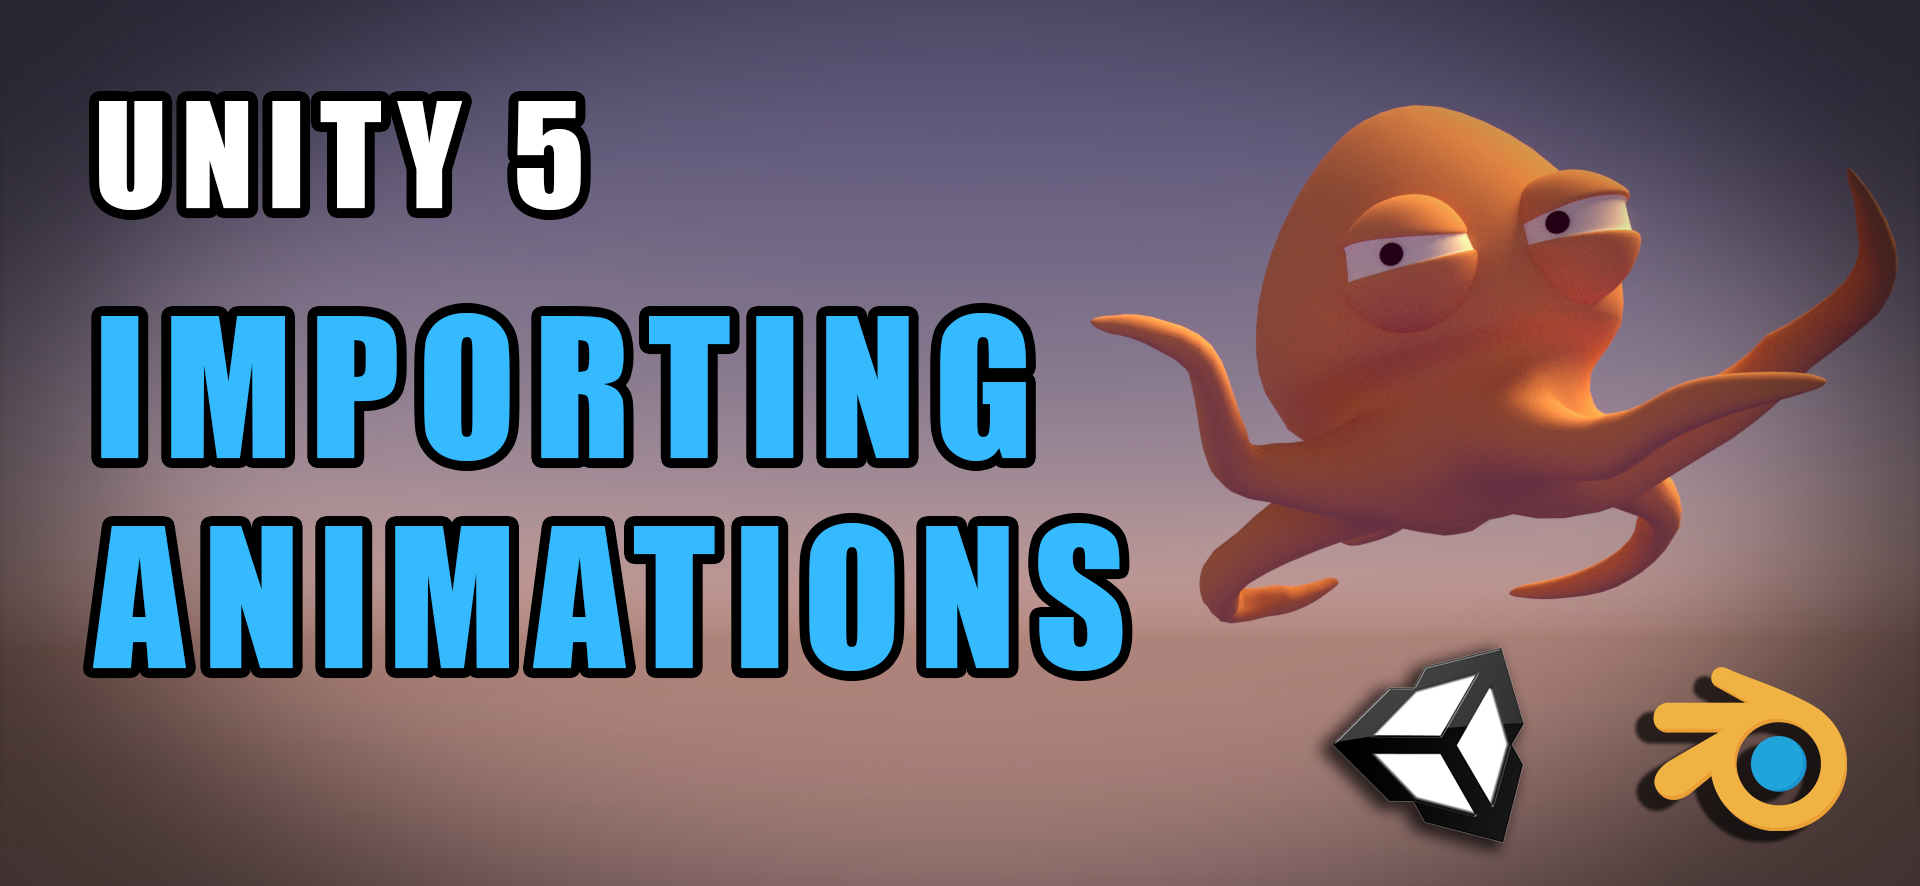 Importing Animations from Blender to Unity 5 - BlenderNation